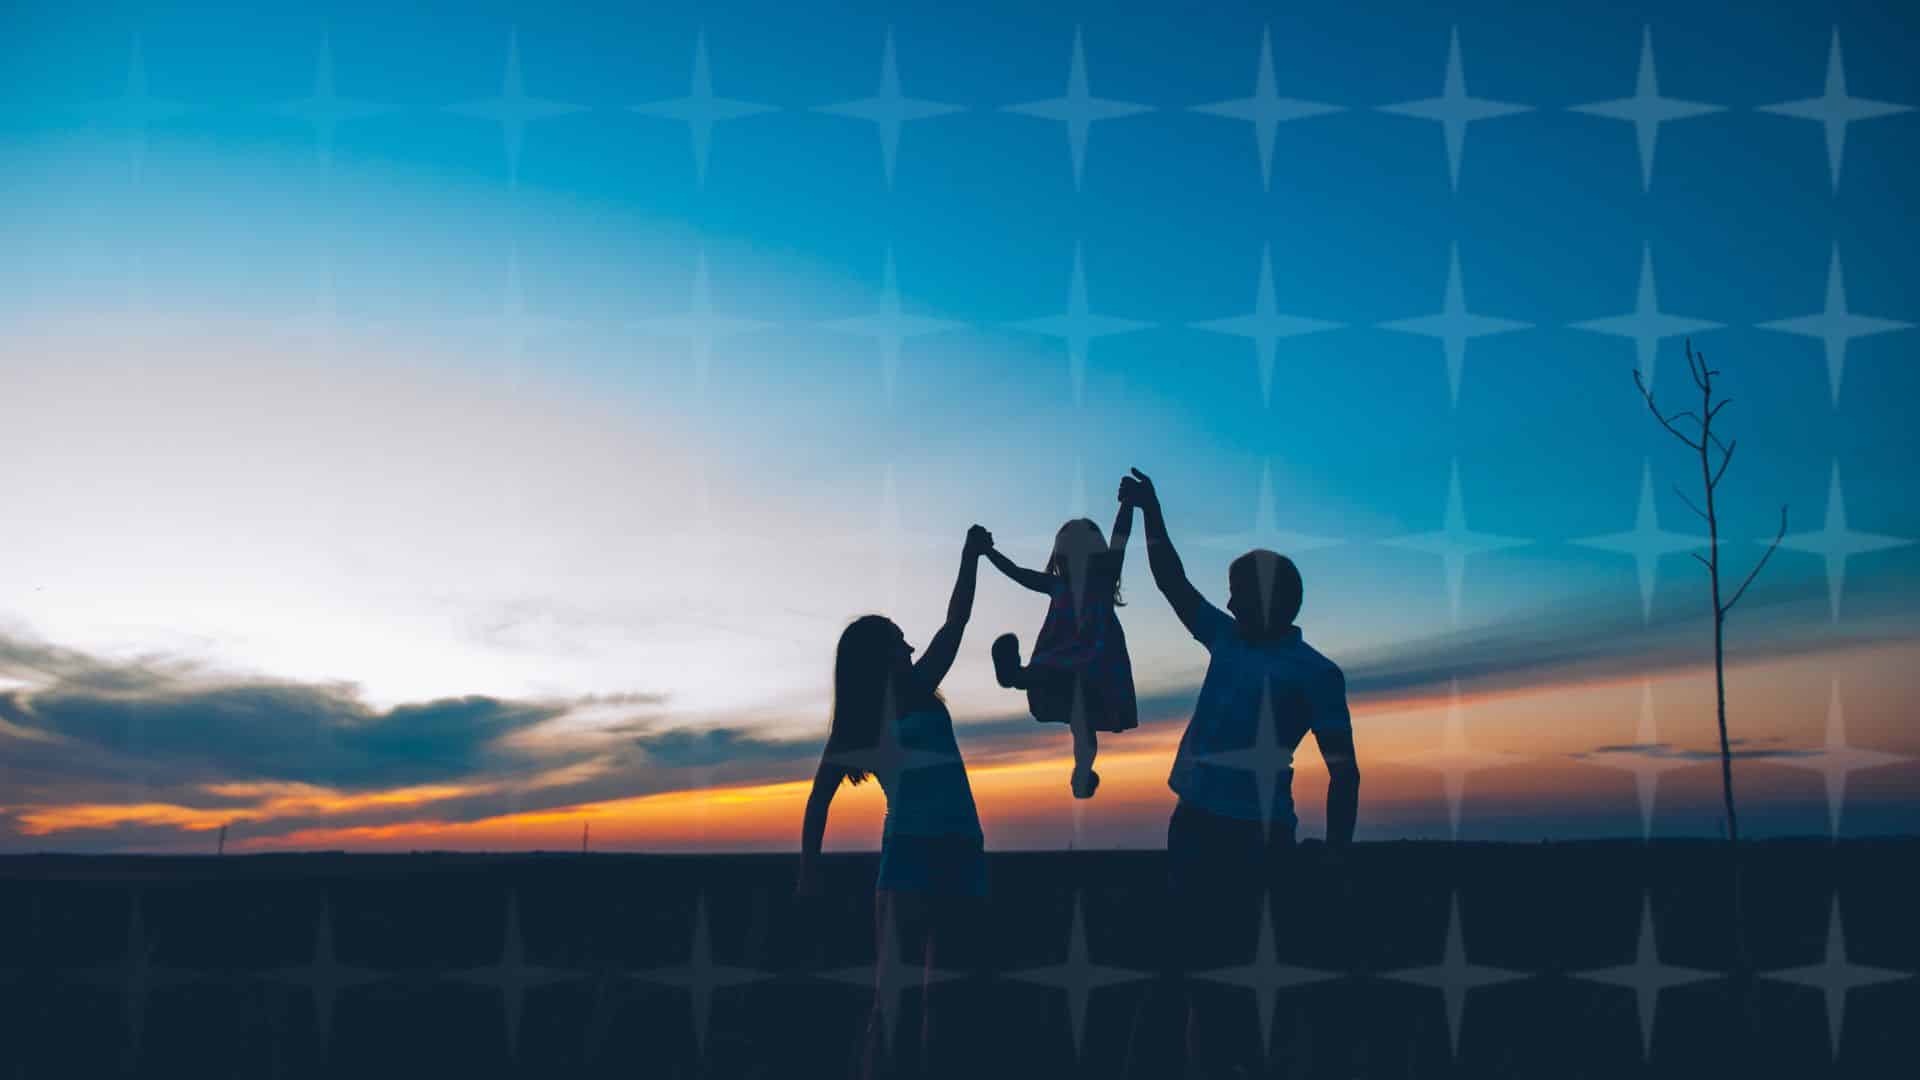 Silhouette of mother, father and child in front of a sunset.